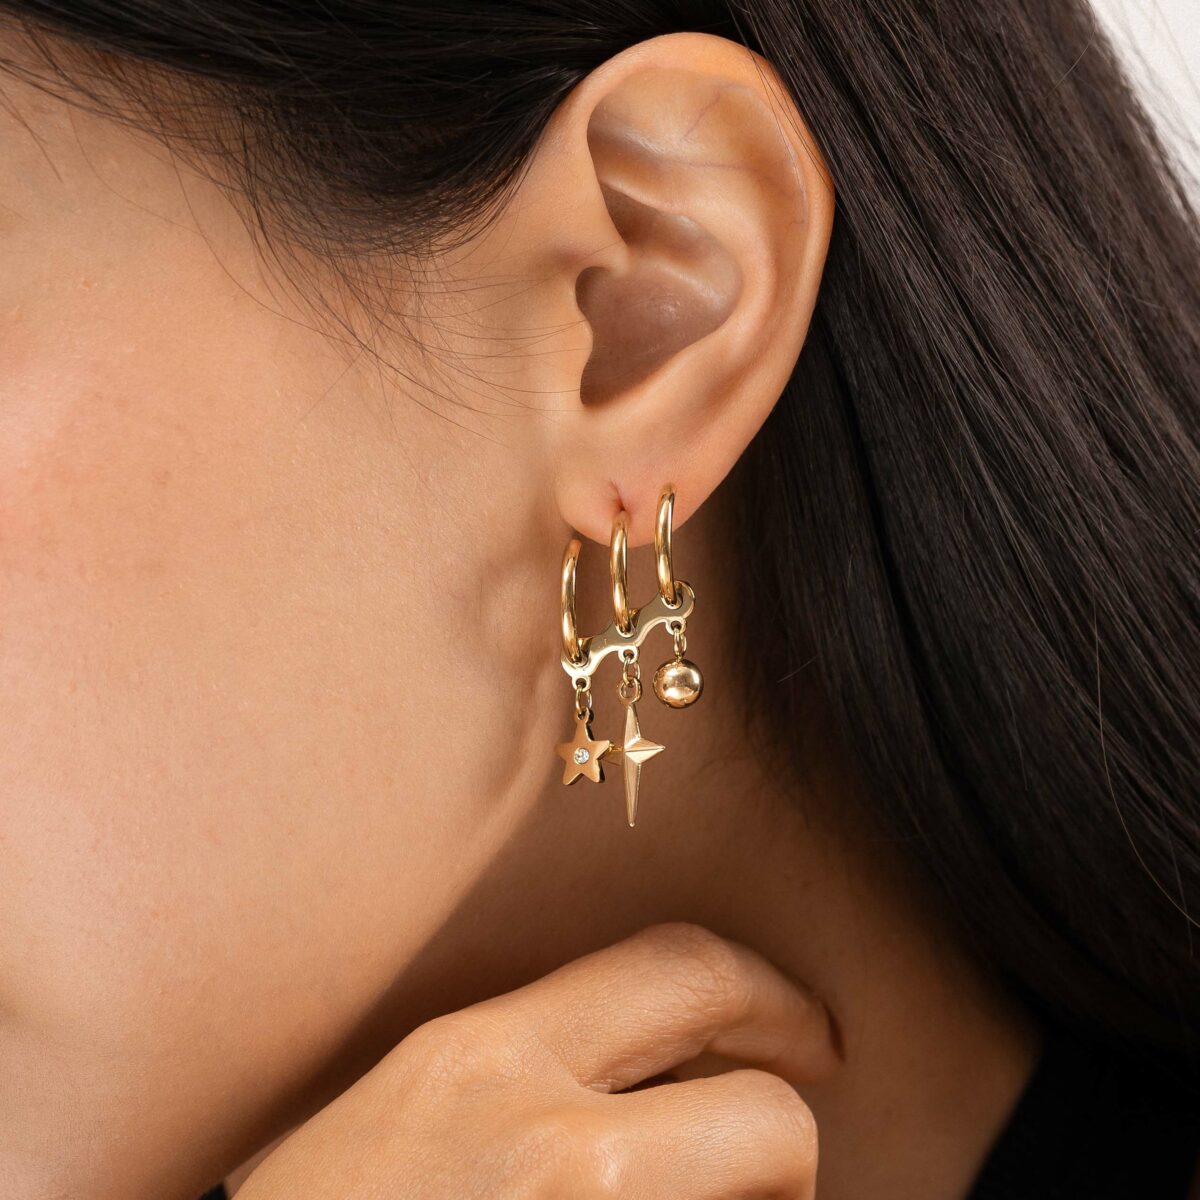 https://m.clubbella.co/product/radial-18k-gold-plated-ear-crawler-earrings/ RADIAL CRAWLER EARRINGS (3)